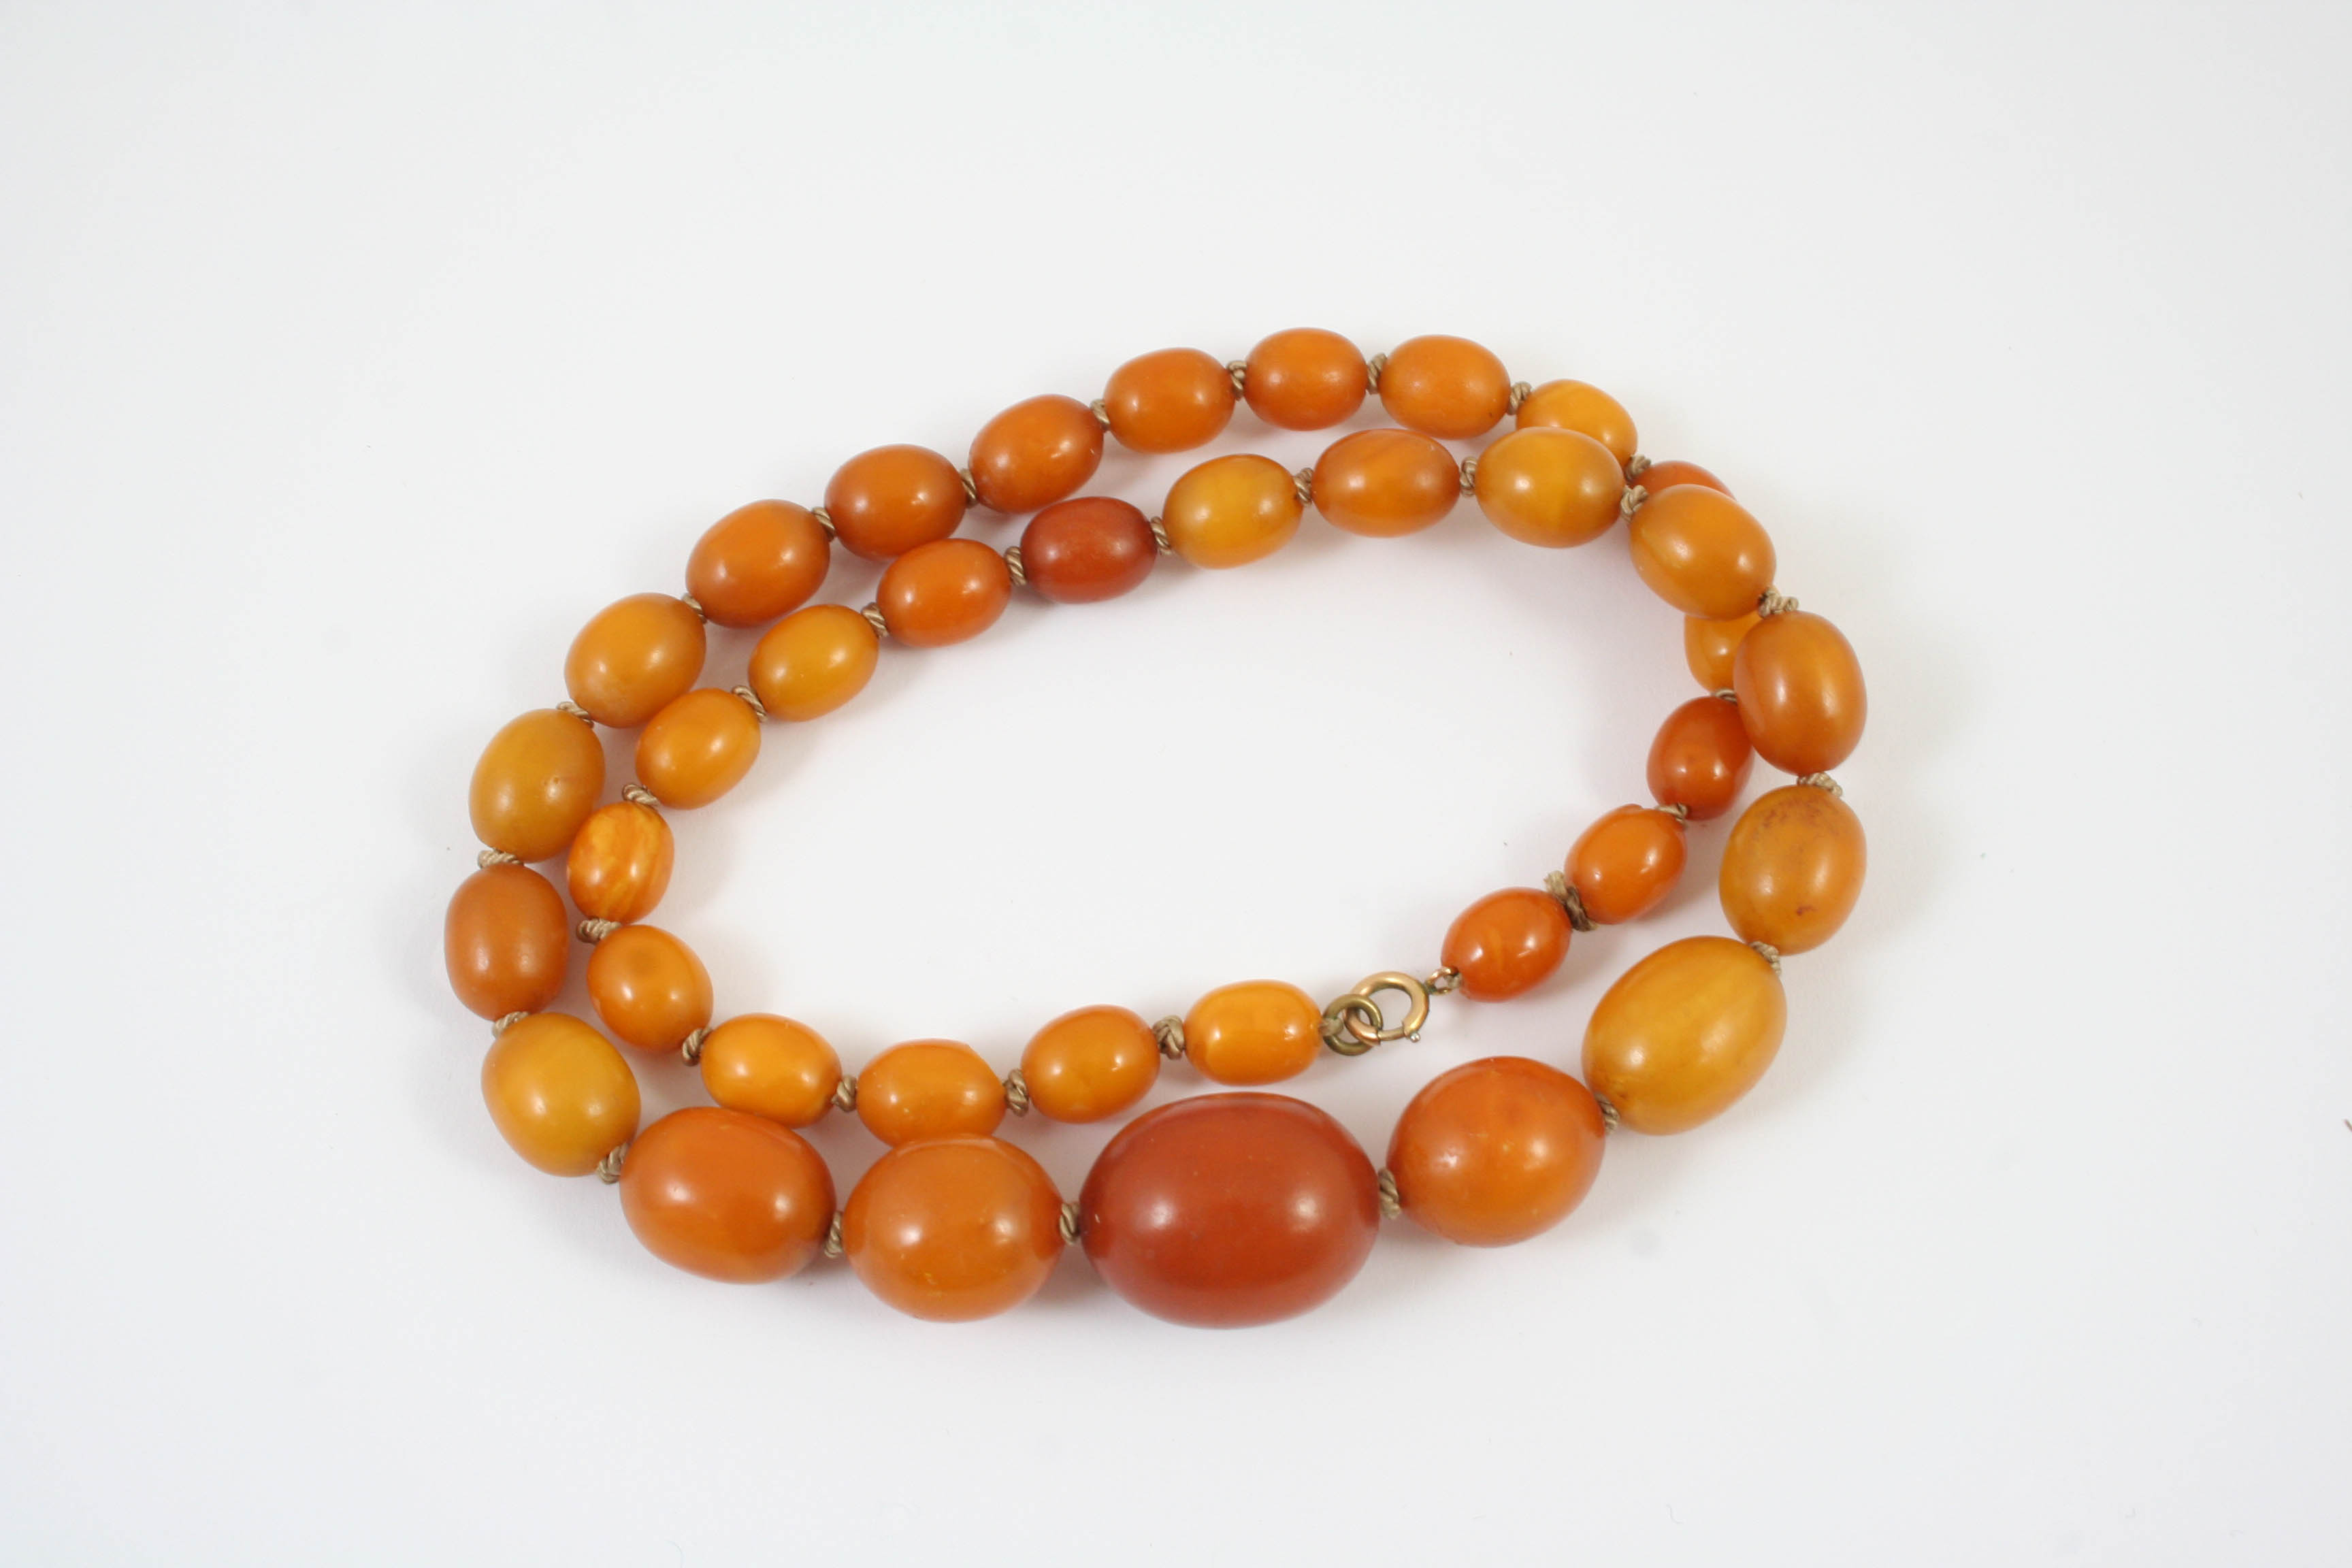 A SINGLE ROW GRADUATED AMBER BEAD NECKLACE 53cm long, 34 grams